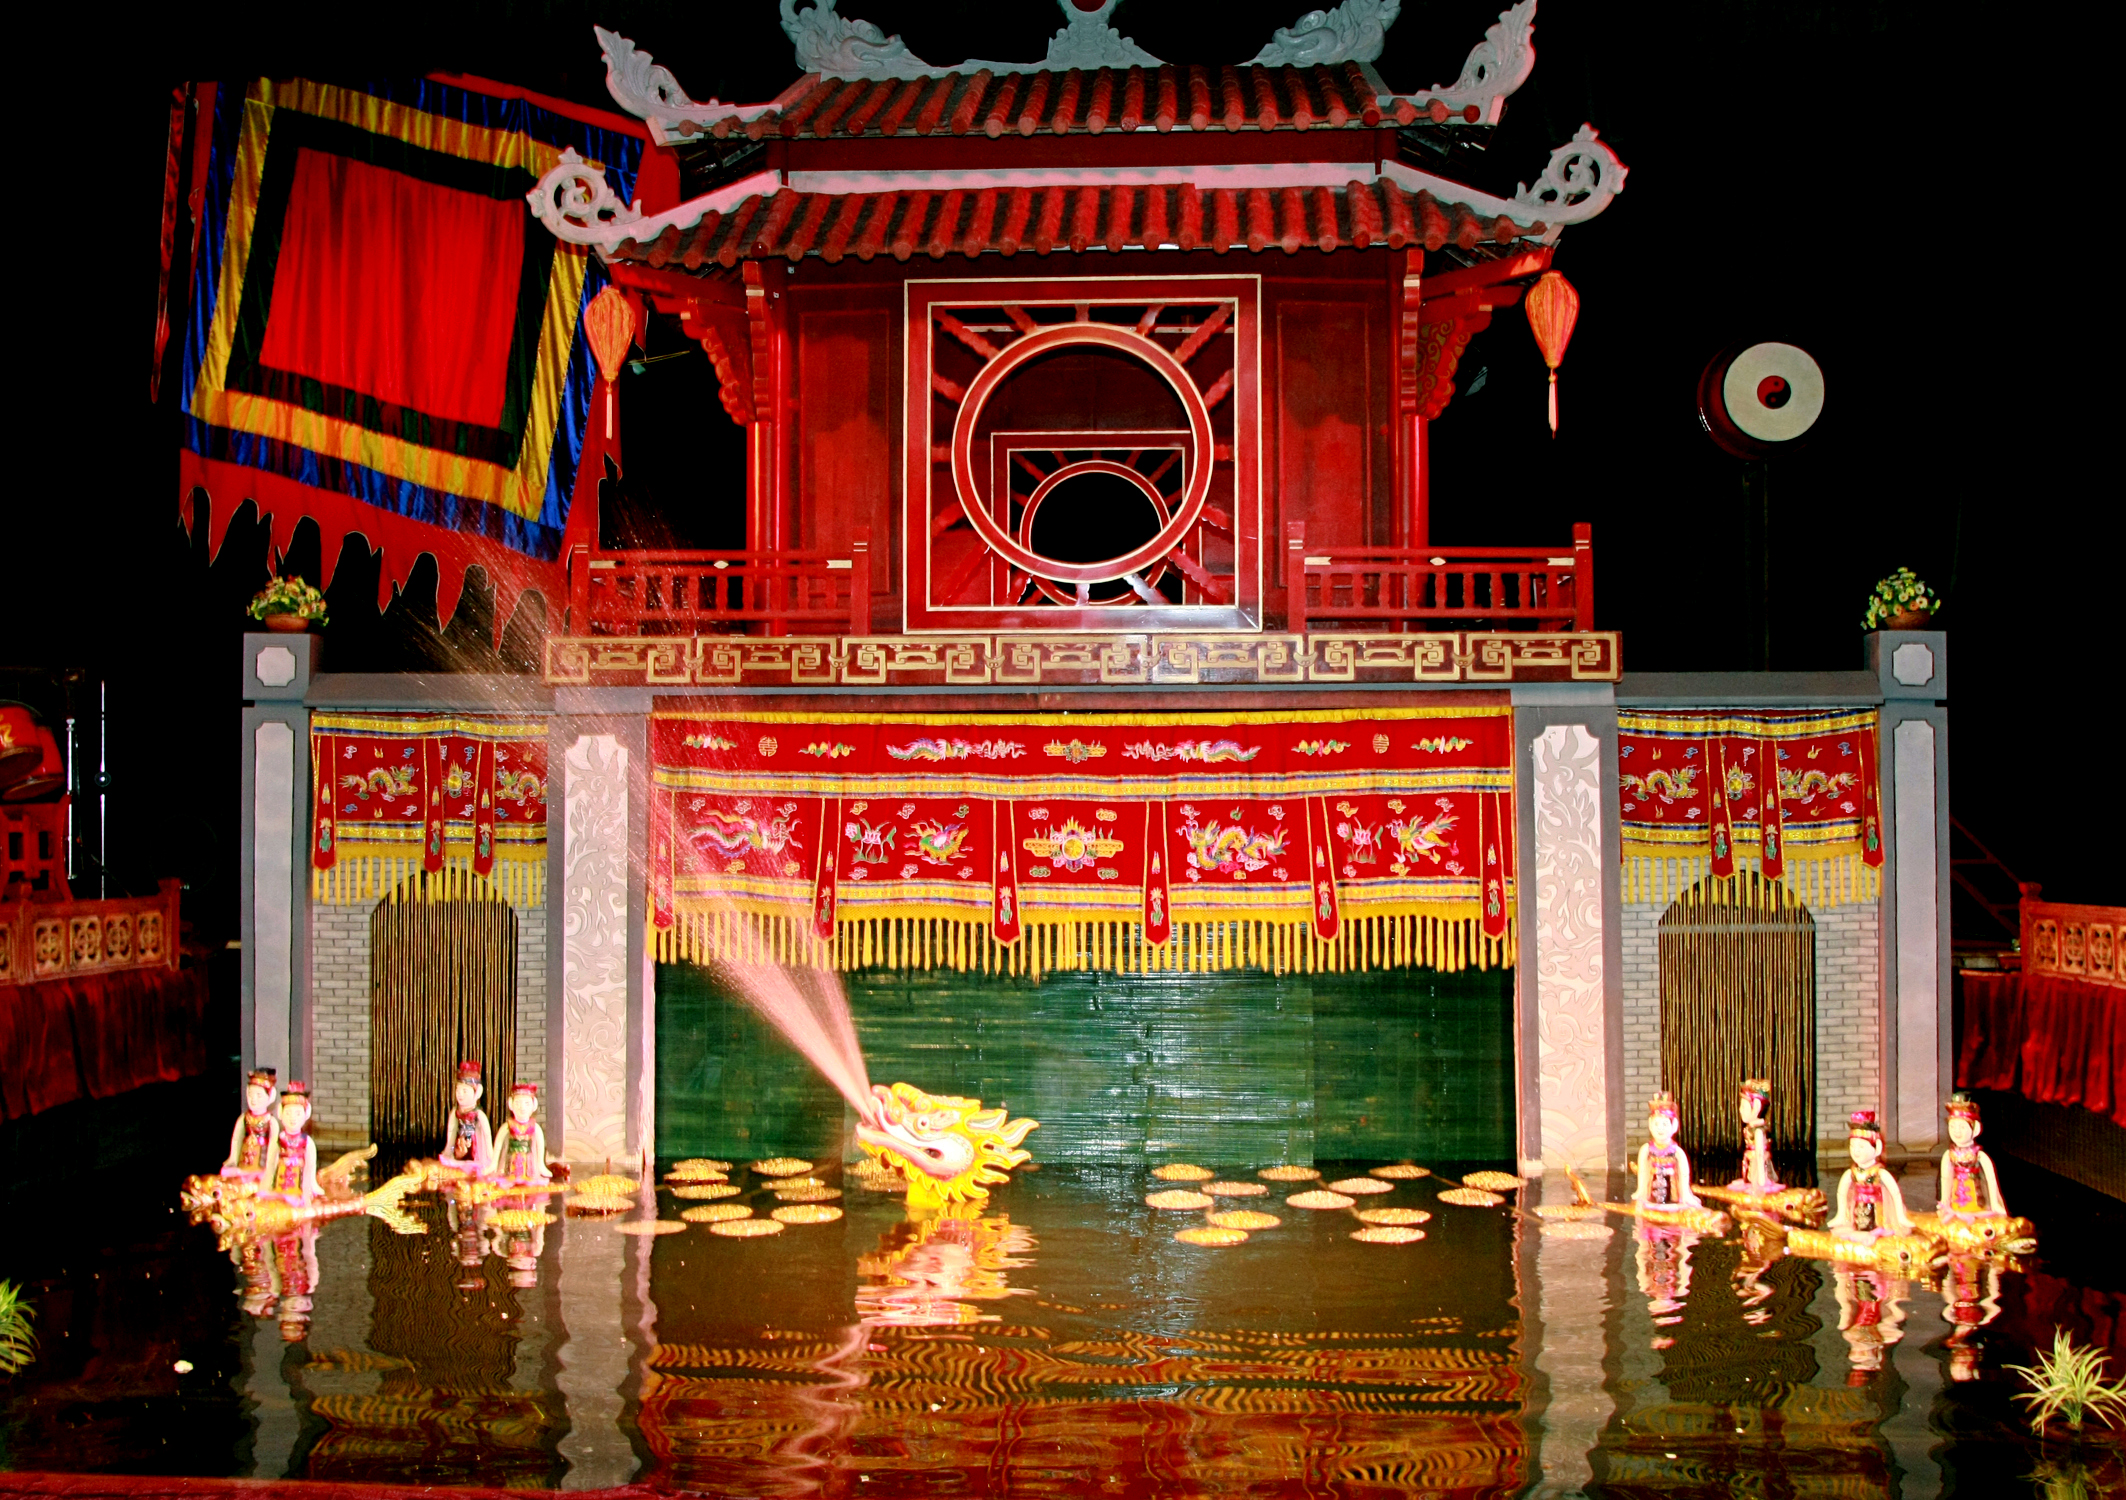 Water Puppetry – Amazing Show That You Must See In Vietnam